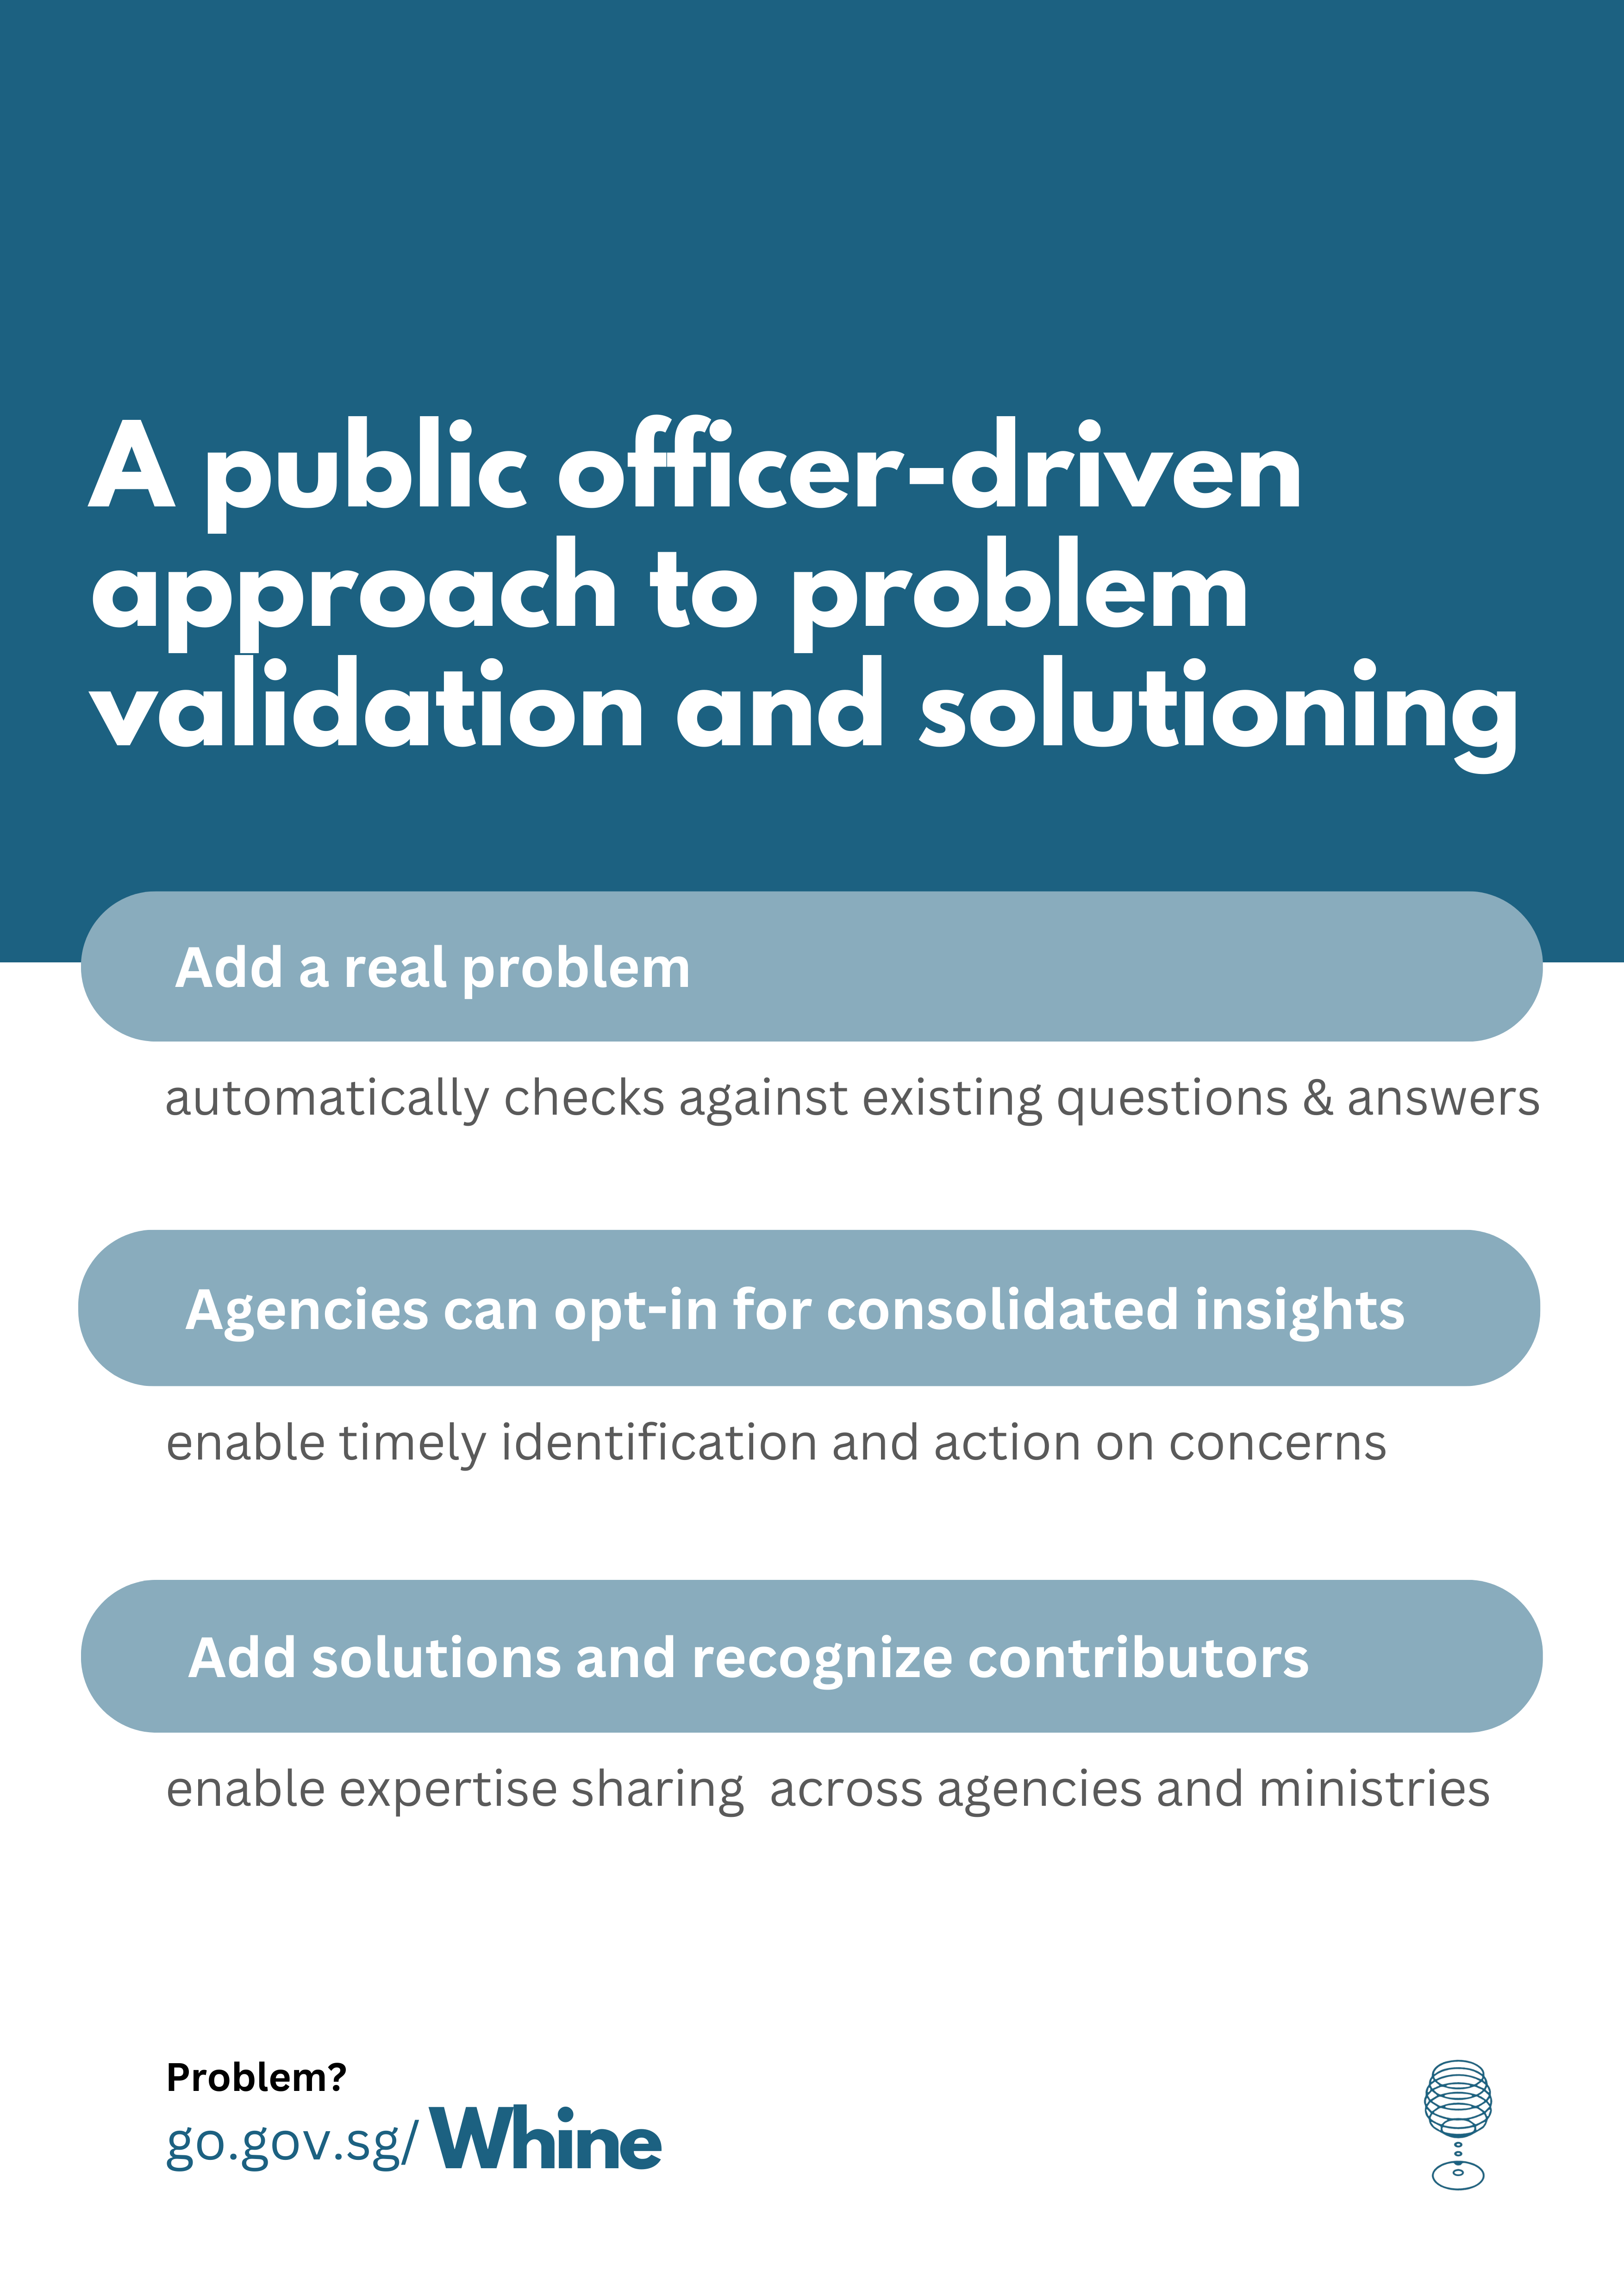 What is Whine? A public officer-driven approach to problem validation and solutioning